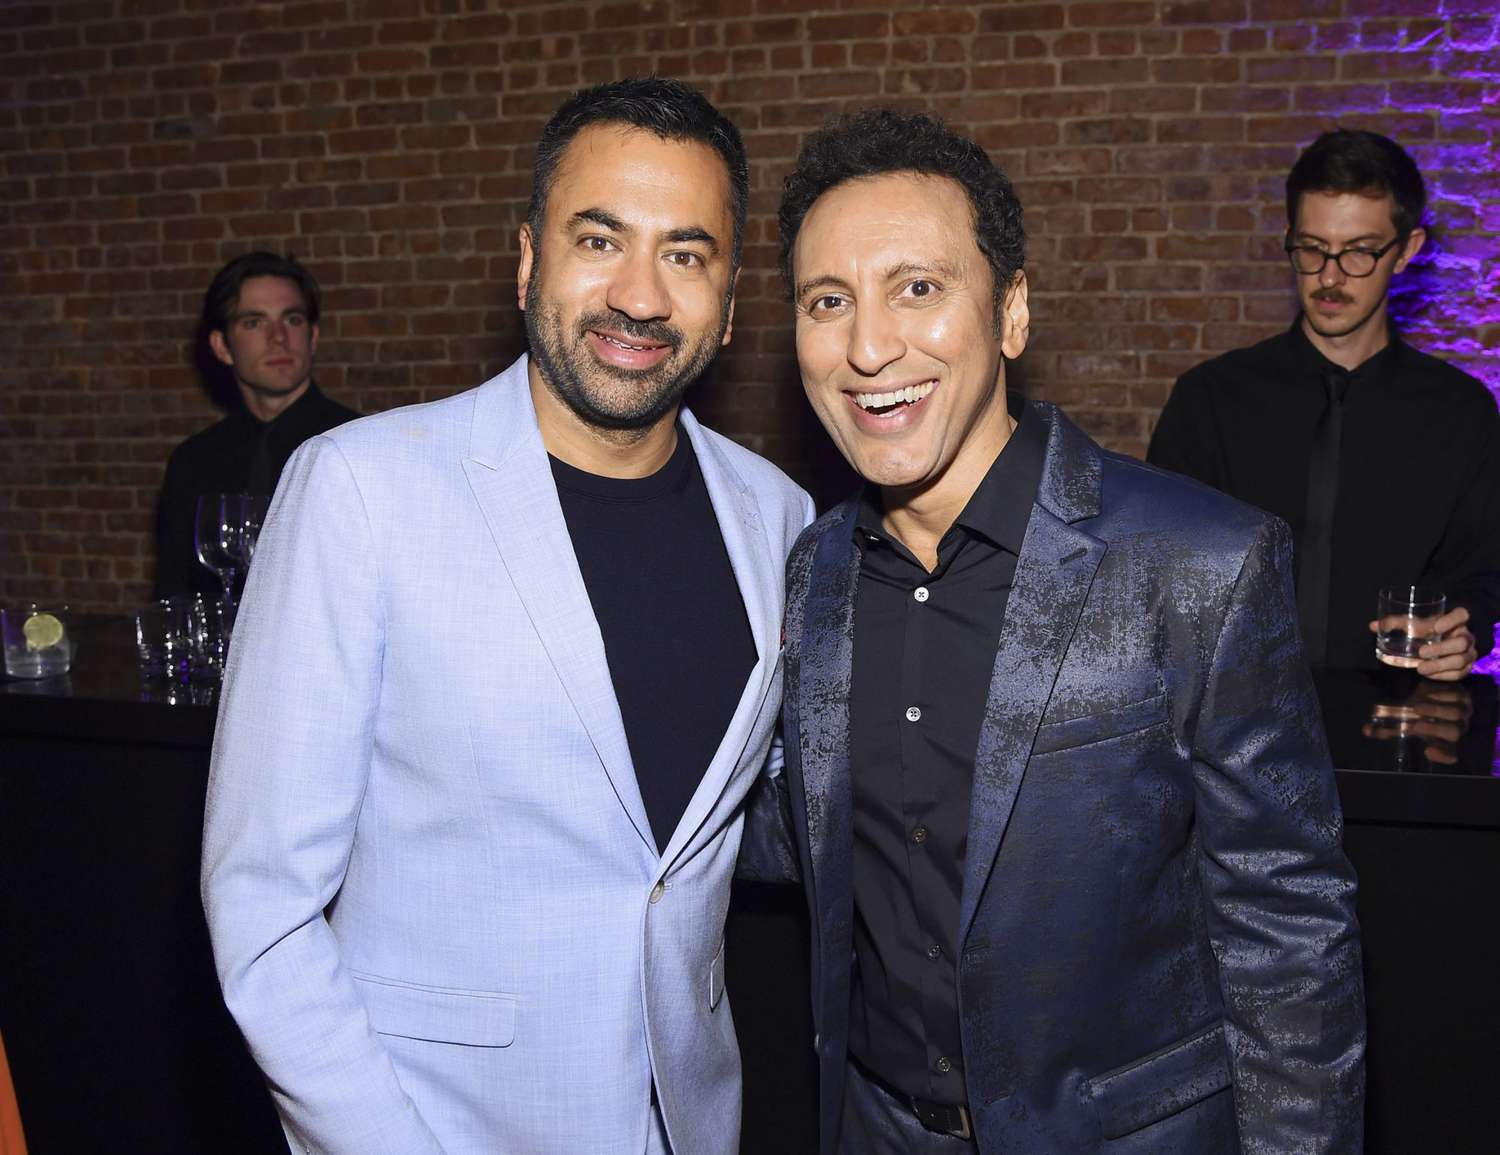 NEW YORK, NEW YORK - MAY 13: Kal Penn and Aasif Mandvi attend the Entertainment Weekly & PEOPLE New York Upfronts Party on May 13, 2019 in New York City. (Photo by Larry Busacca/Getty Images for Entertainment Weekly & PEOPLE)